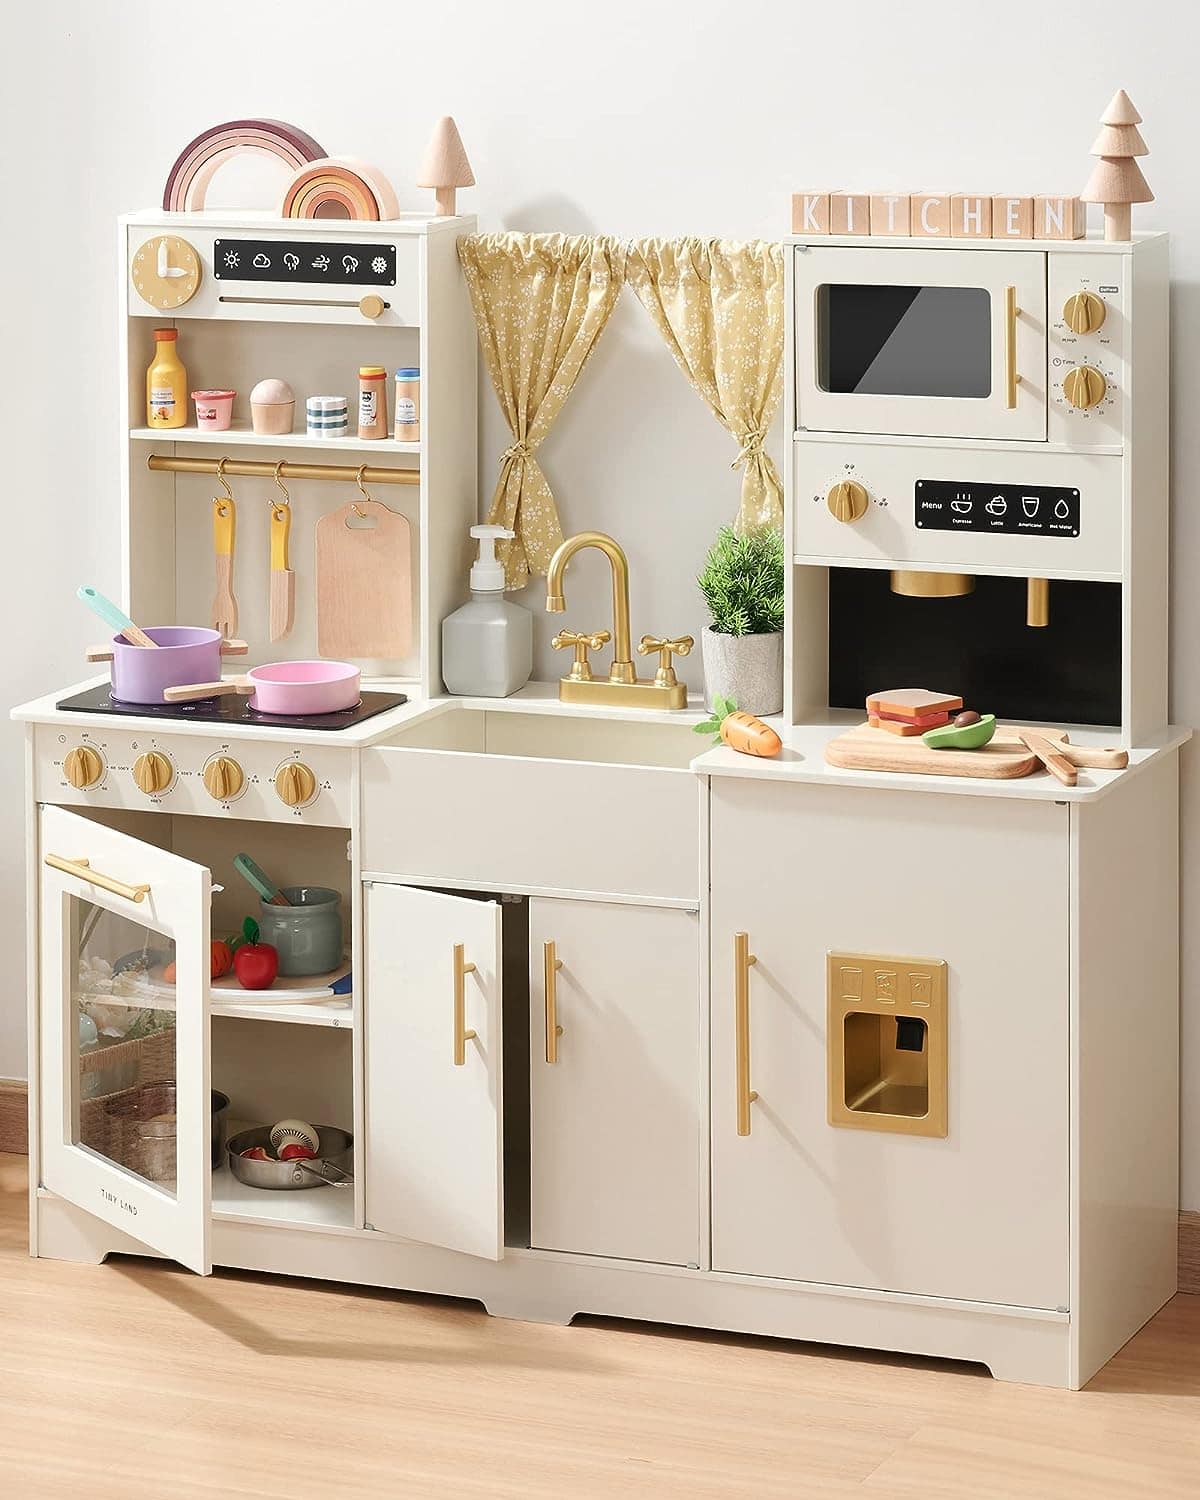 Tiny Land Play Kitchen for Kids